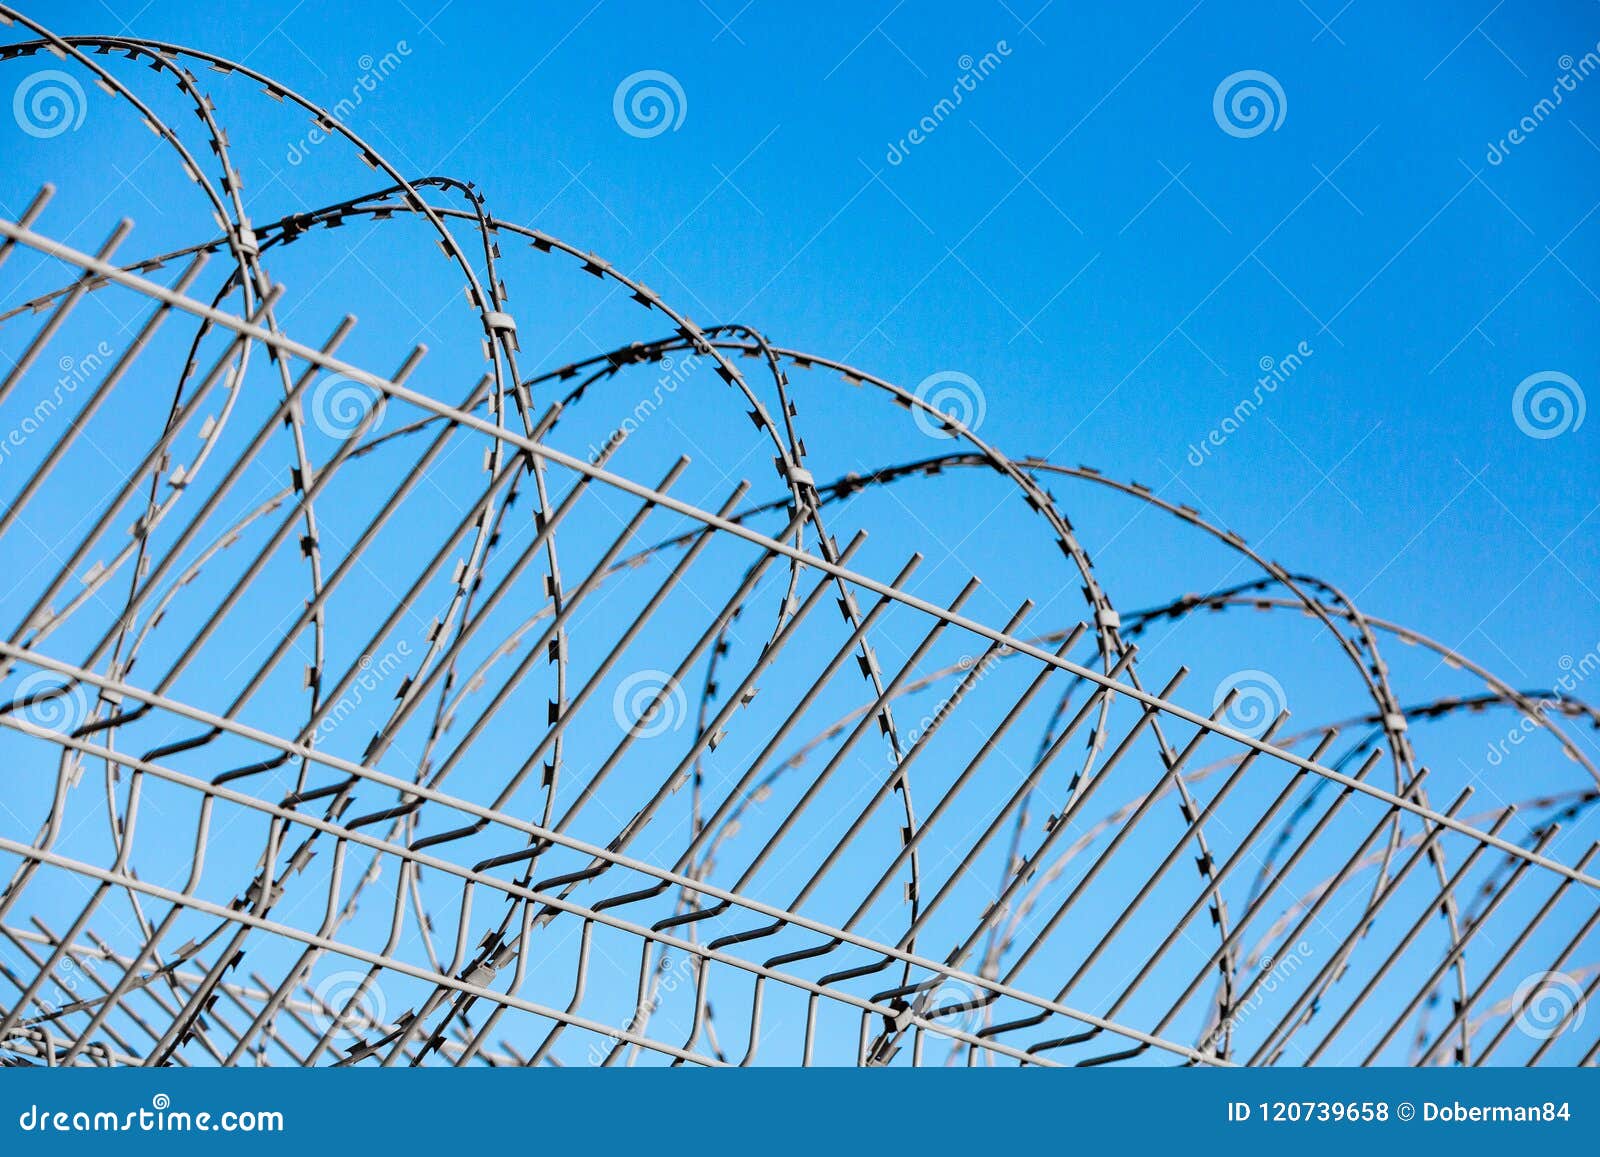 Security With A Barbed Wire Fence Stock Photo - Image of steel, freedom ...
